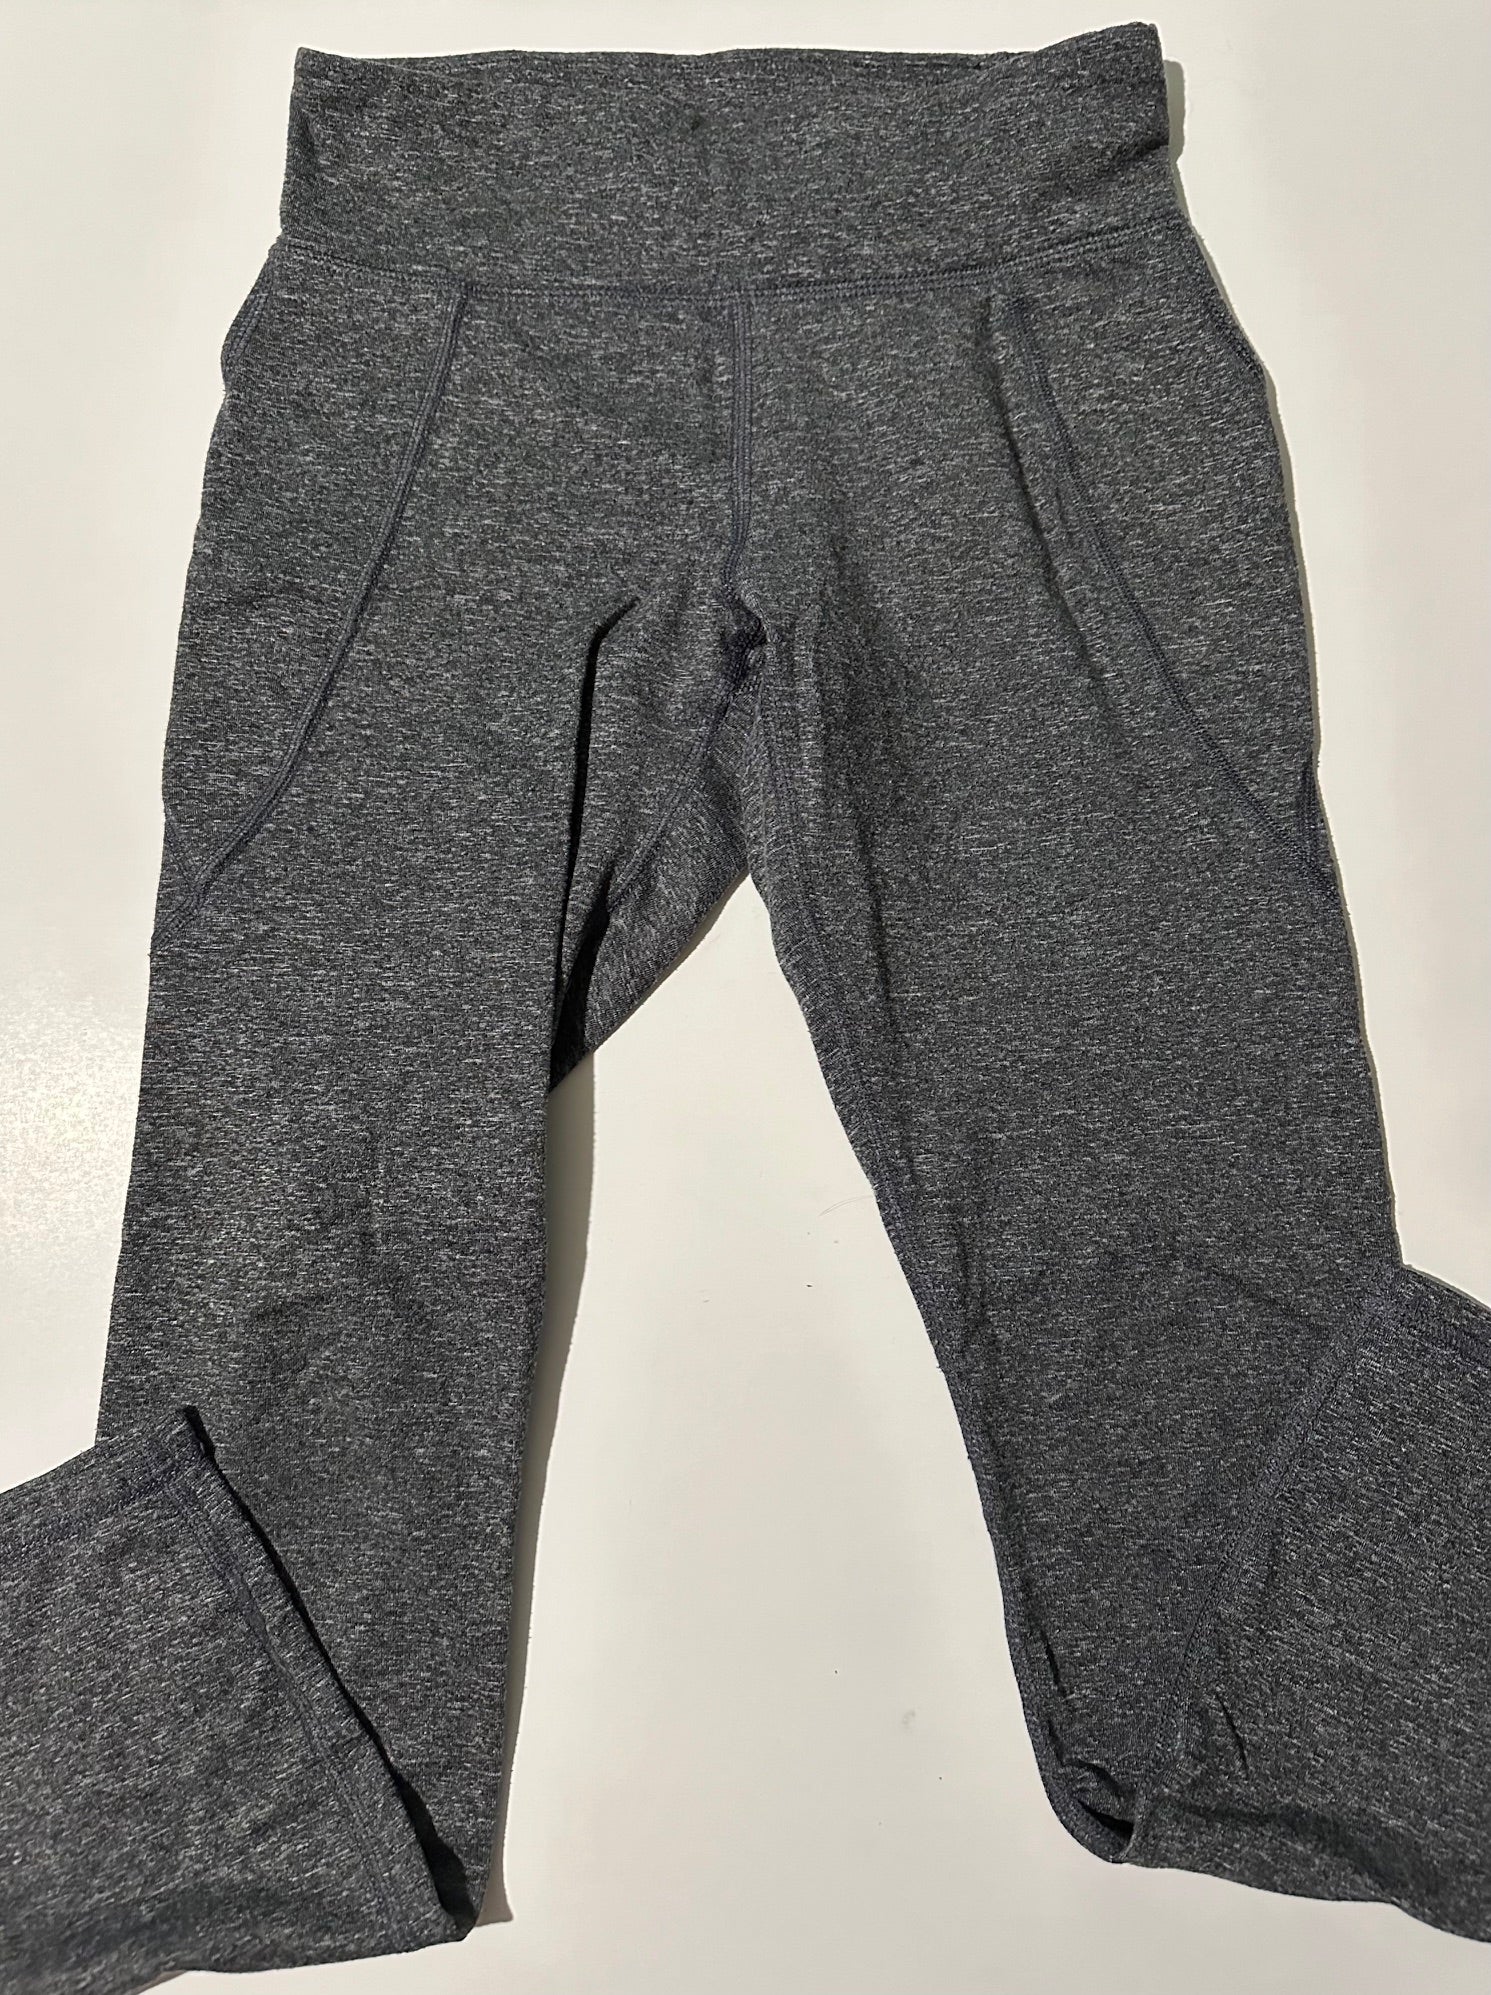 Old Navy, Grey Active Leggings - Size Large (10-12)